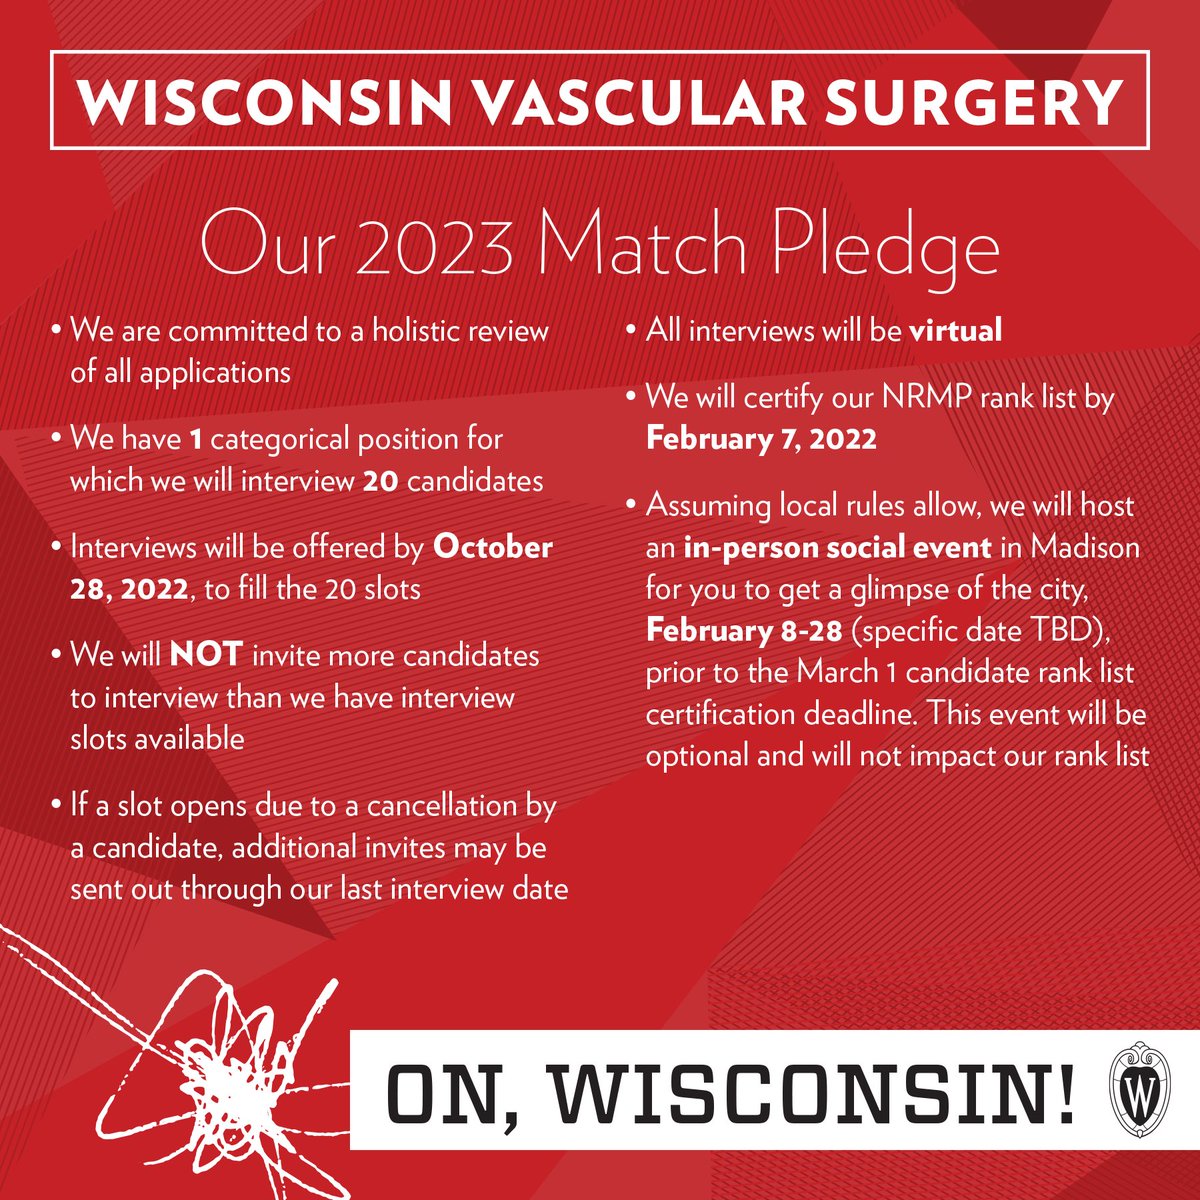 We are thrilled to bring back our Match Pledges for all four divisions this #matchday! Applicants: TOMORROW we will be offering interview slots for our vascular surgery residency. We’ll see some of you real soon, and as always, #OnWisconsin! #WhyWiscSurgery